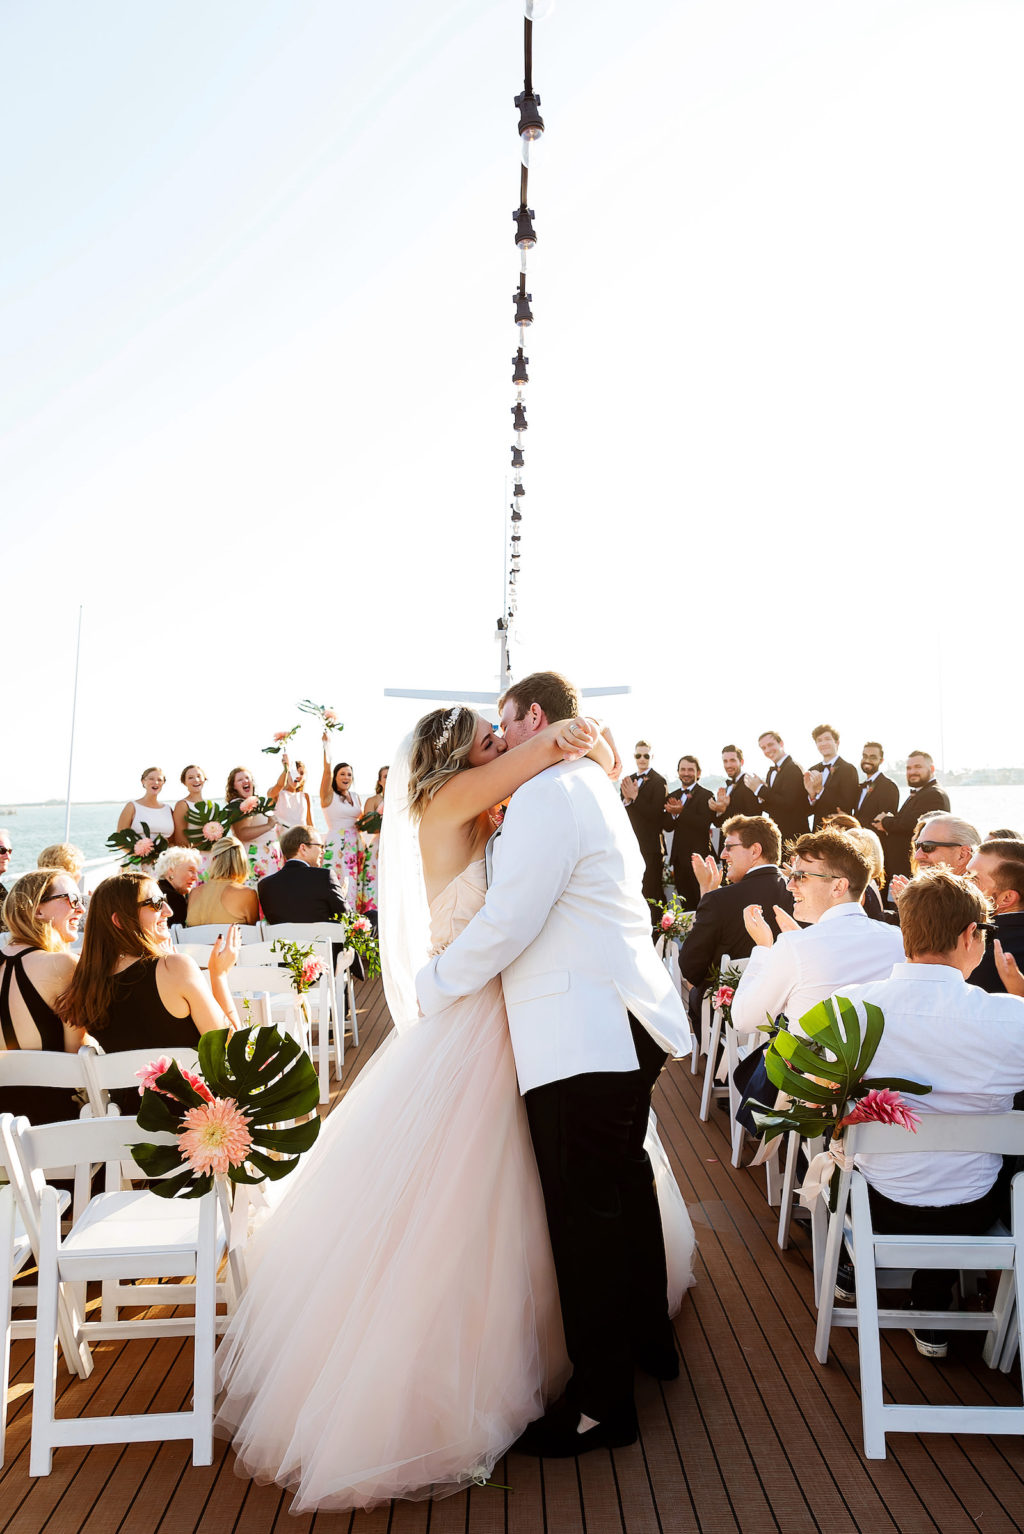 Tropical Bride and Groom Exchanging Wedding Vows on Waterfront Wedding Venue Yacht StarShip | Tampa Bay Wedding Photographer Limelight Photography